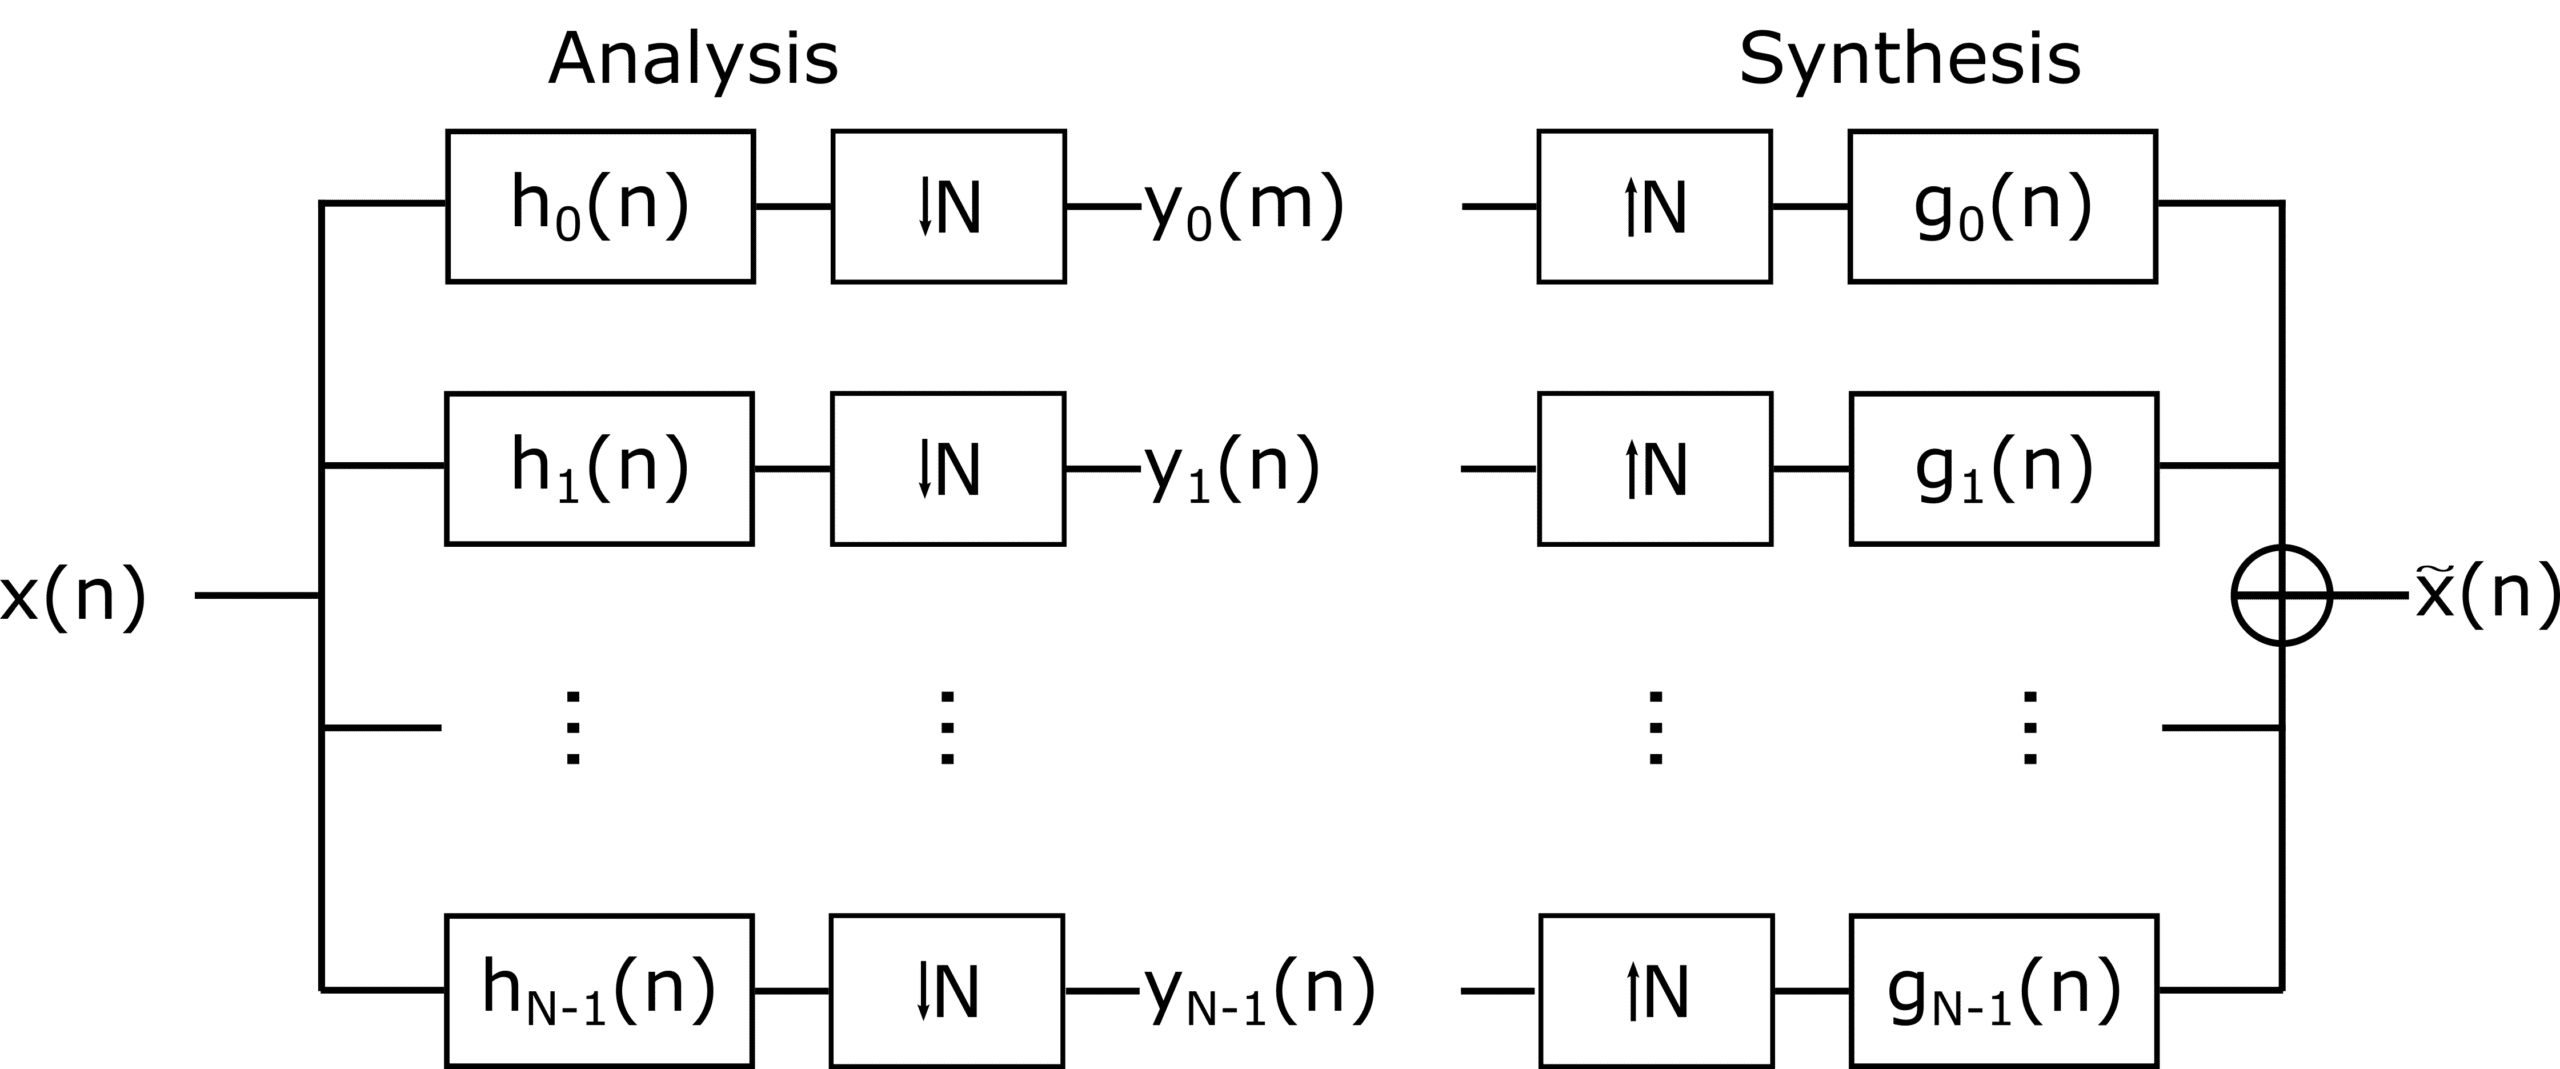 analysis and synthesis filter bank